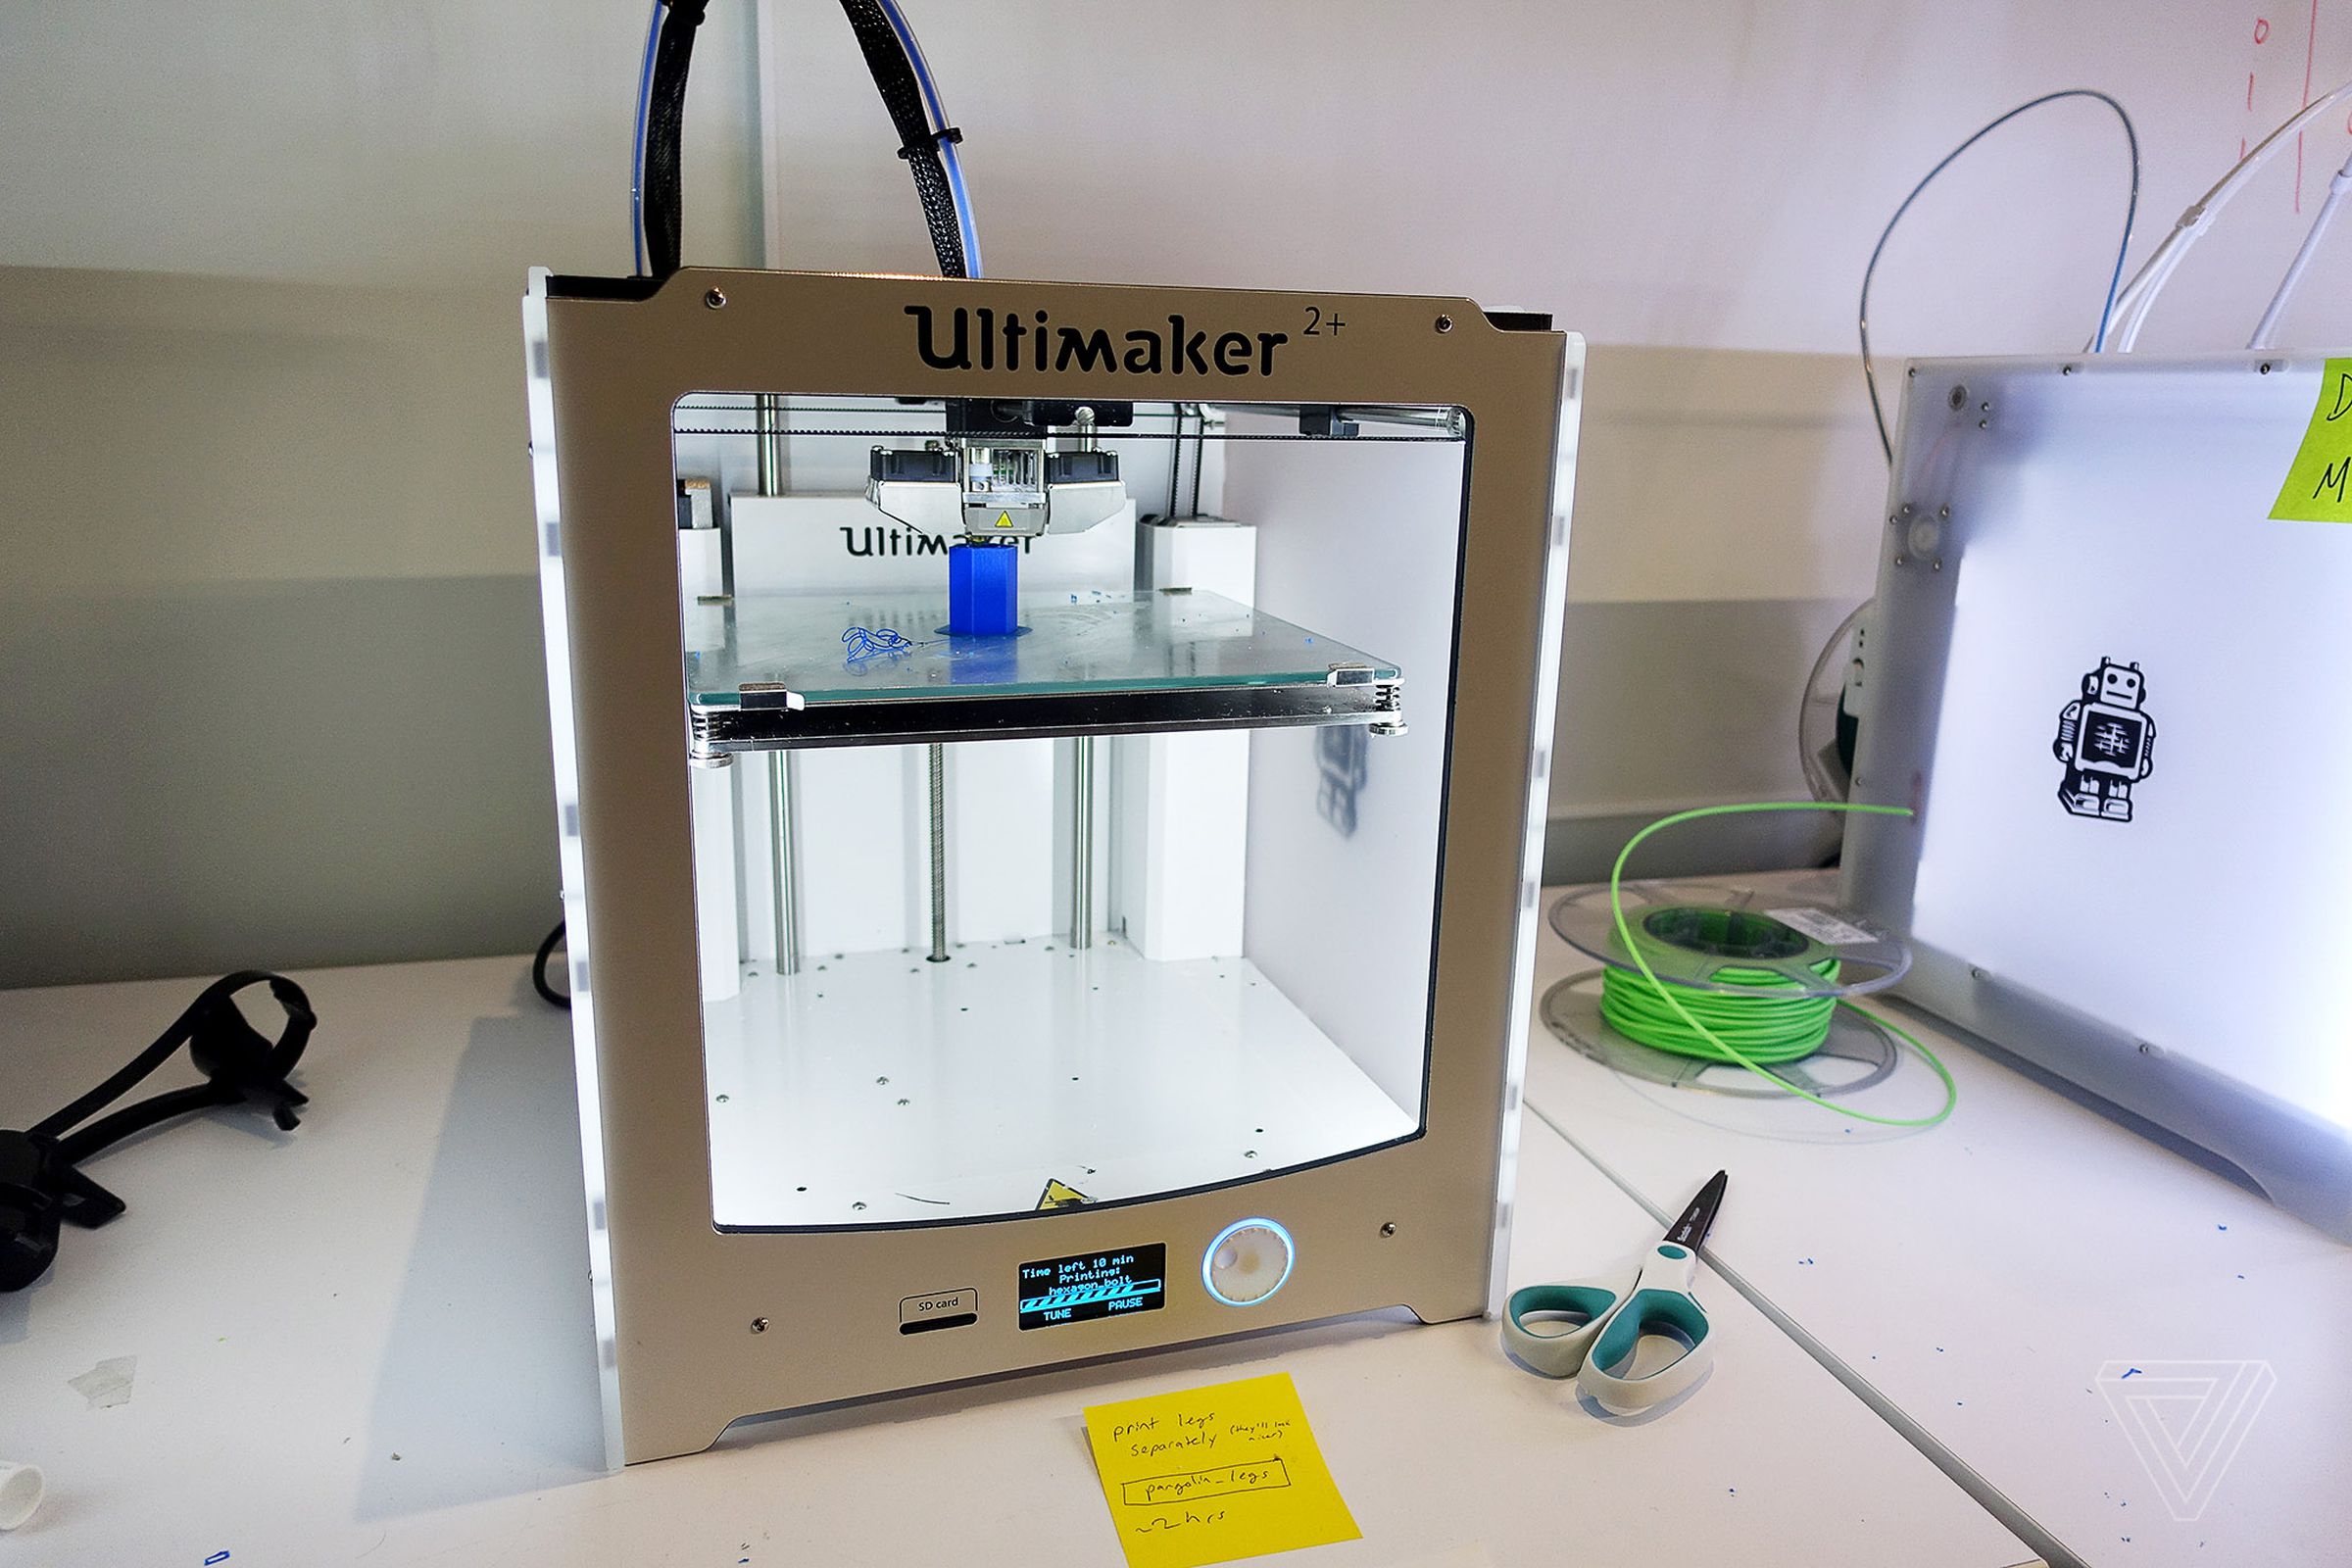 One of the Ultimaker 3D printers that students used to build their product prototypes.